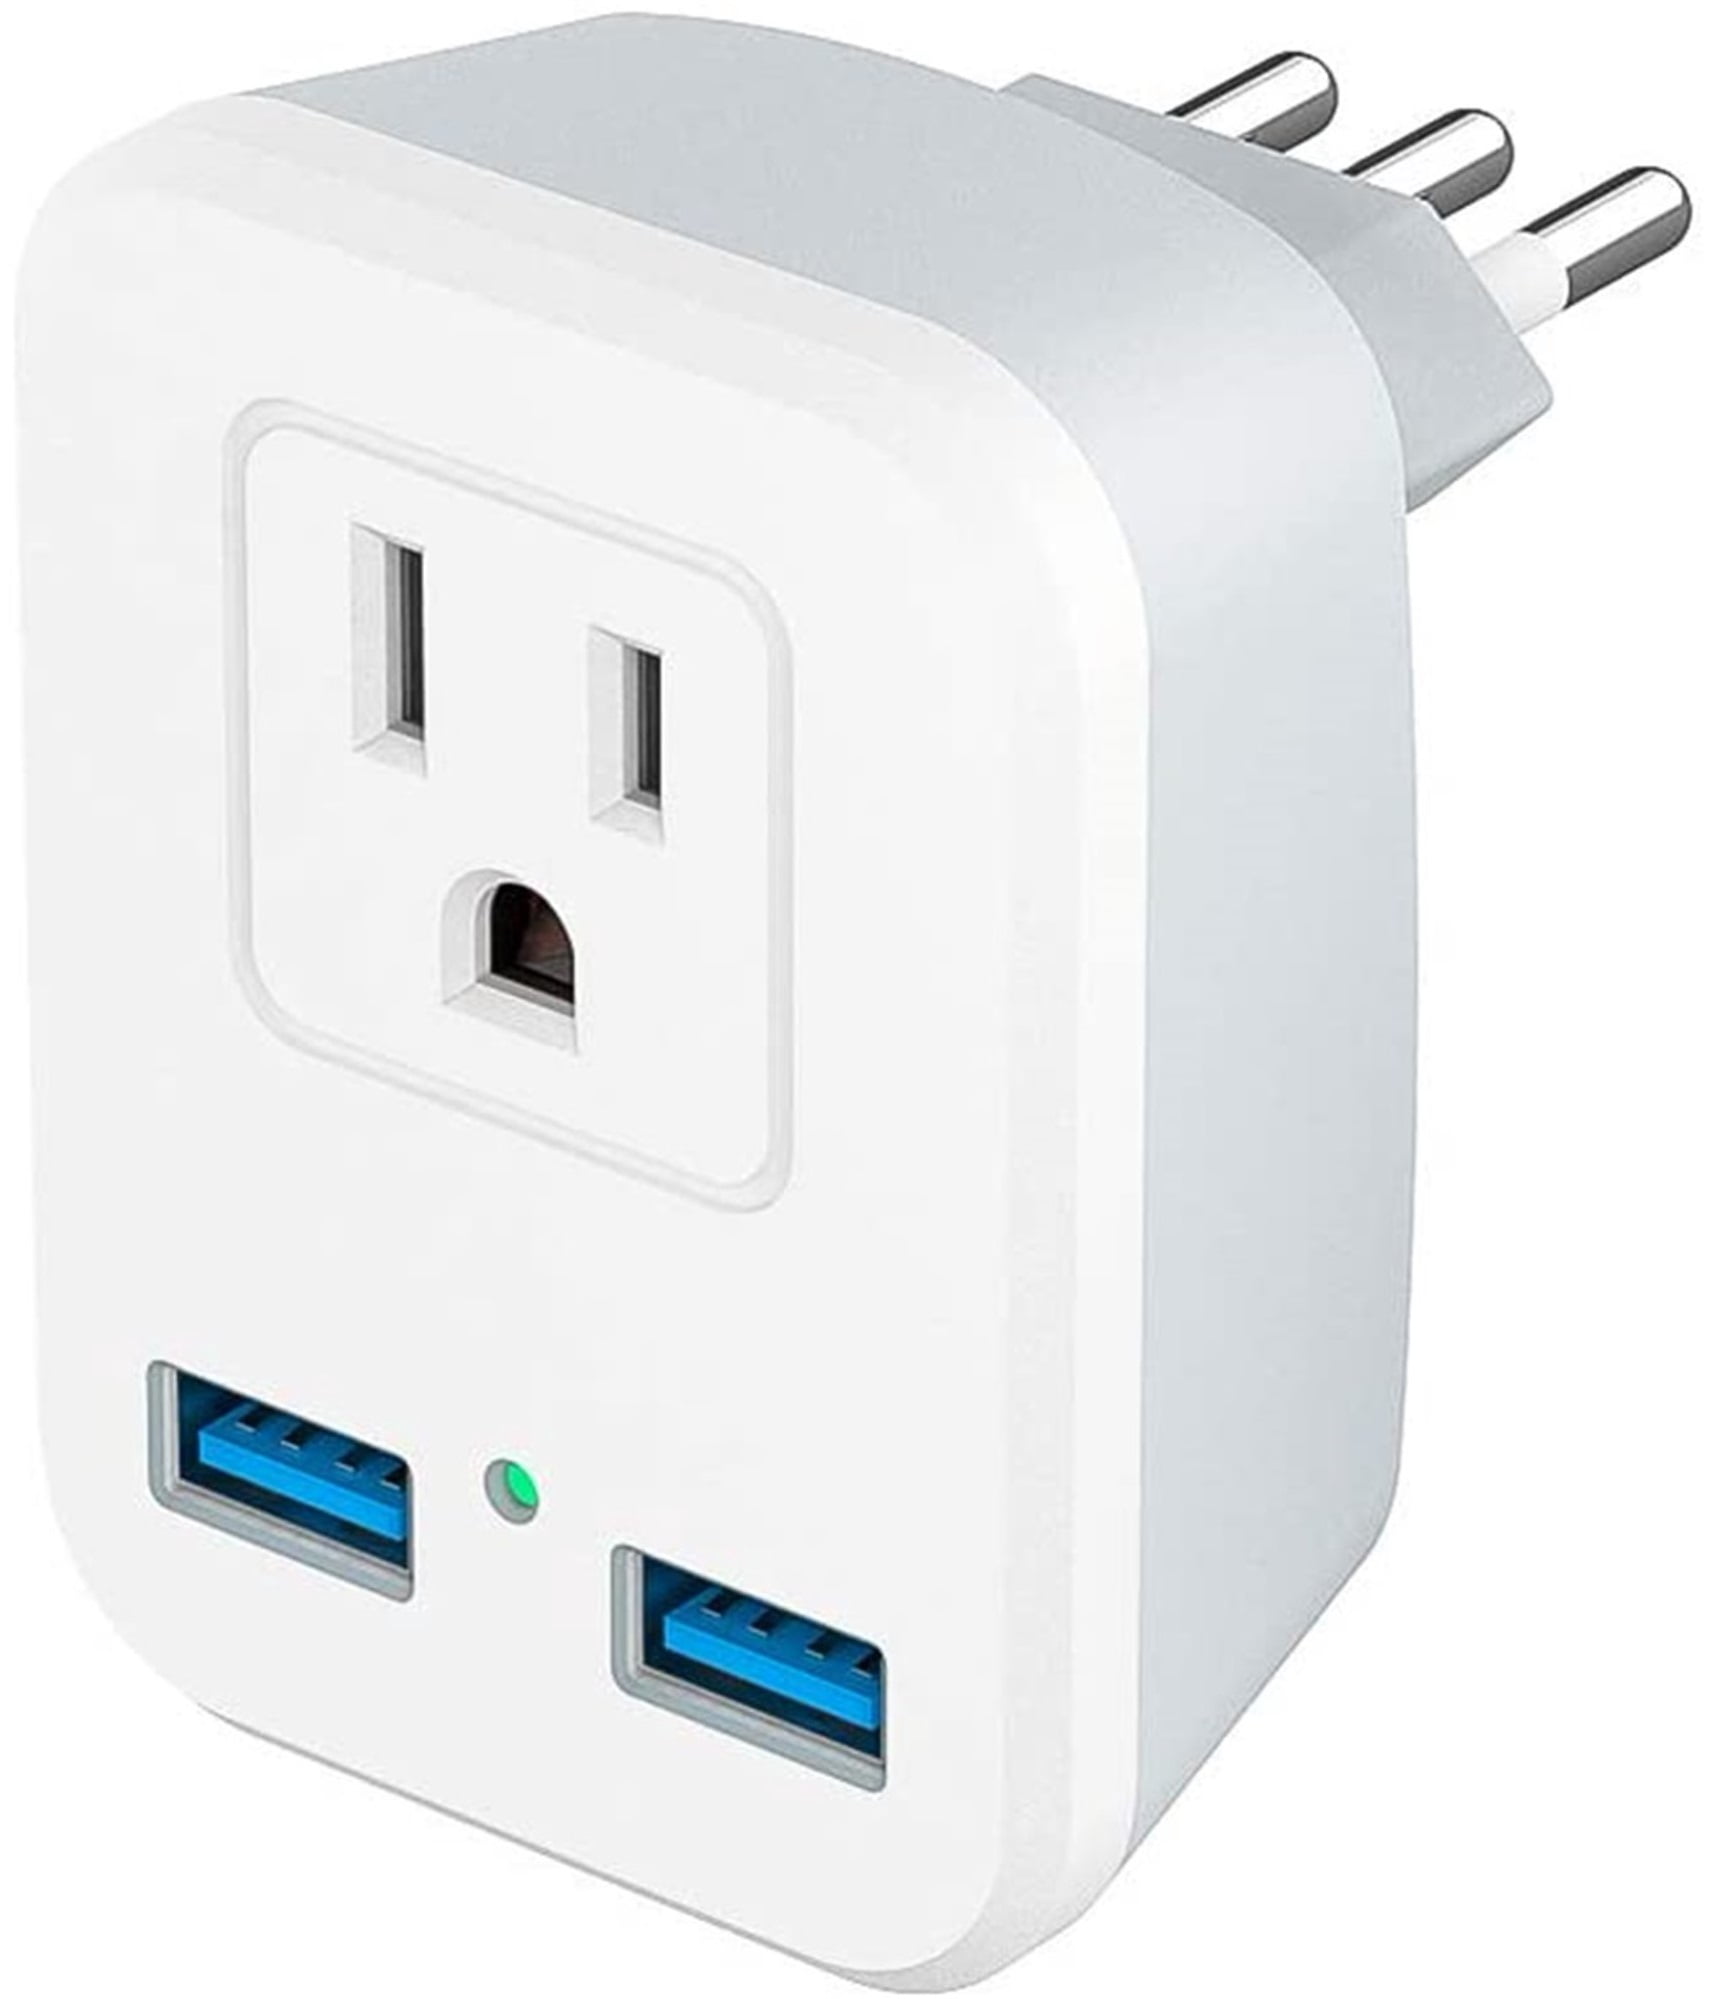 Adapter Power Plug Converter With 2 USB 1 Electrical Outlet for to Italy Chile Lybia Ethiopia Syria Tunisia Uruguay (Type L) - Walmart.com